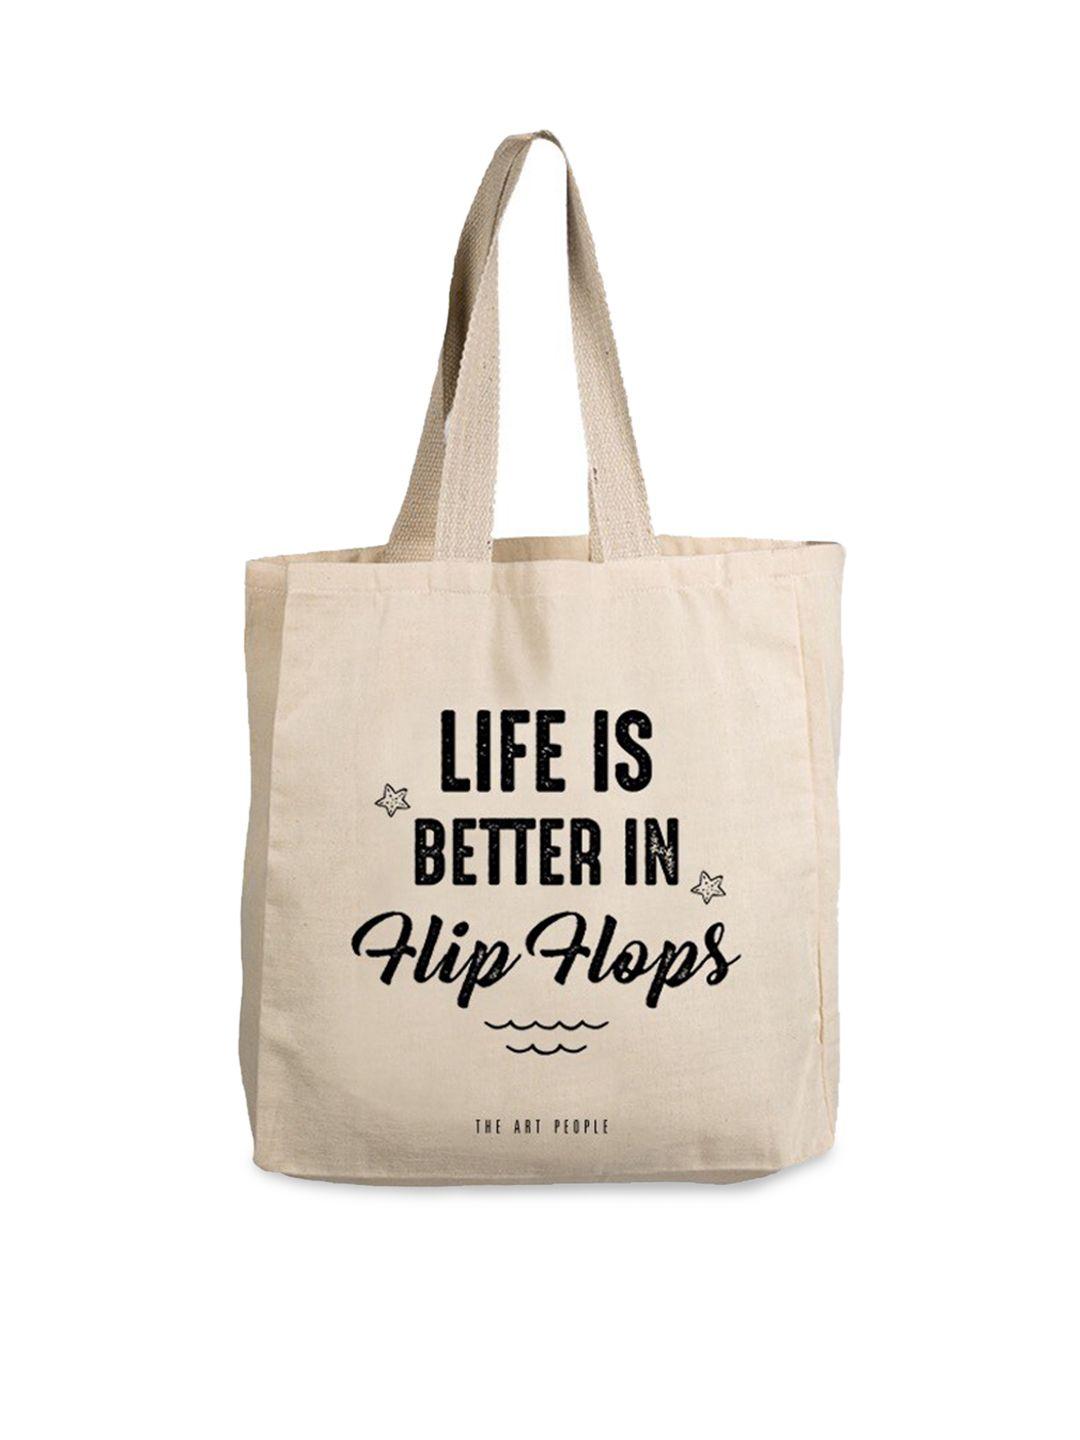 the art people off white printed shopper tote bag